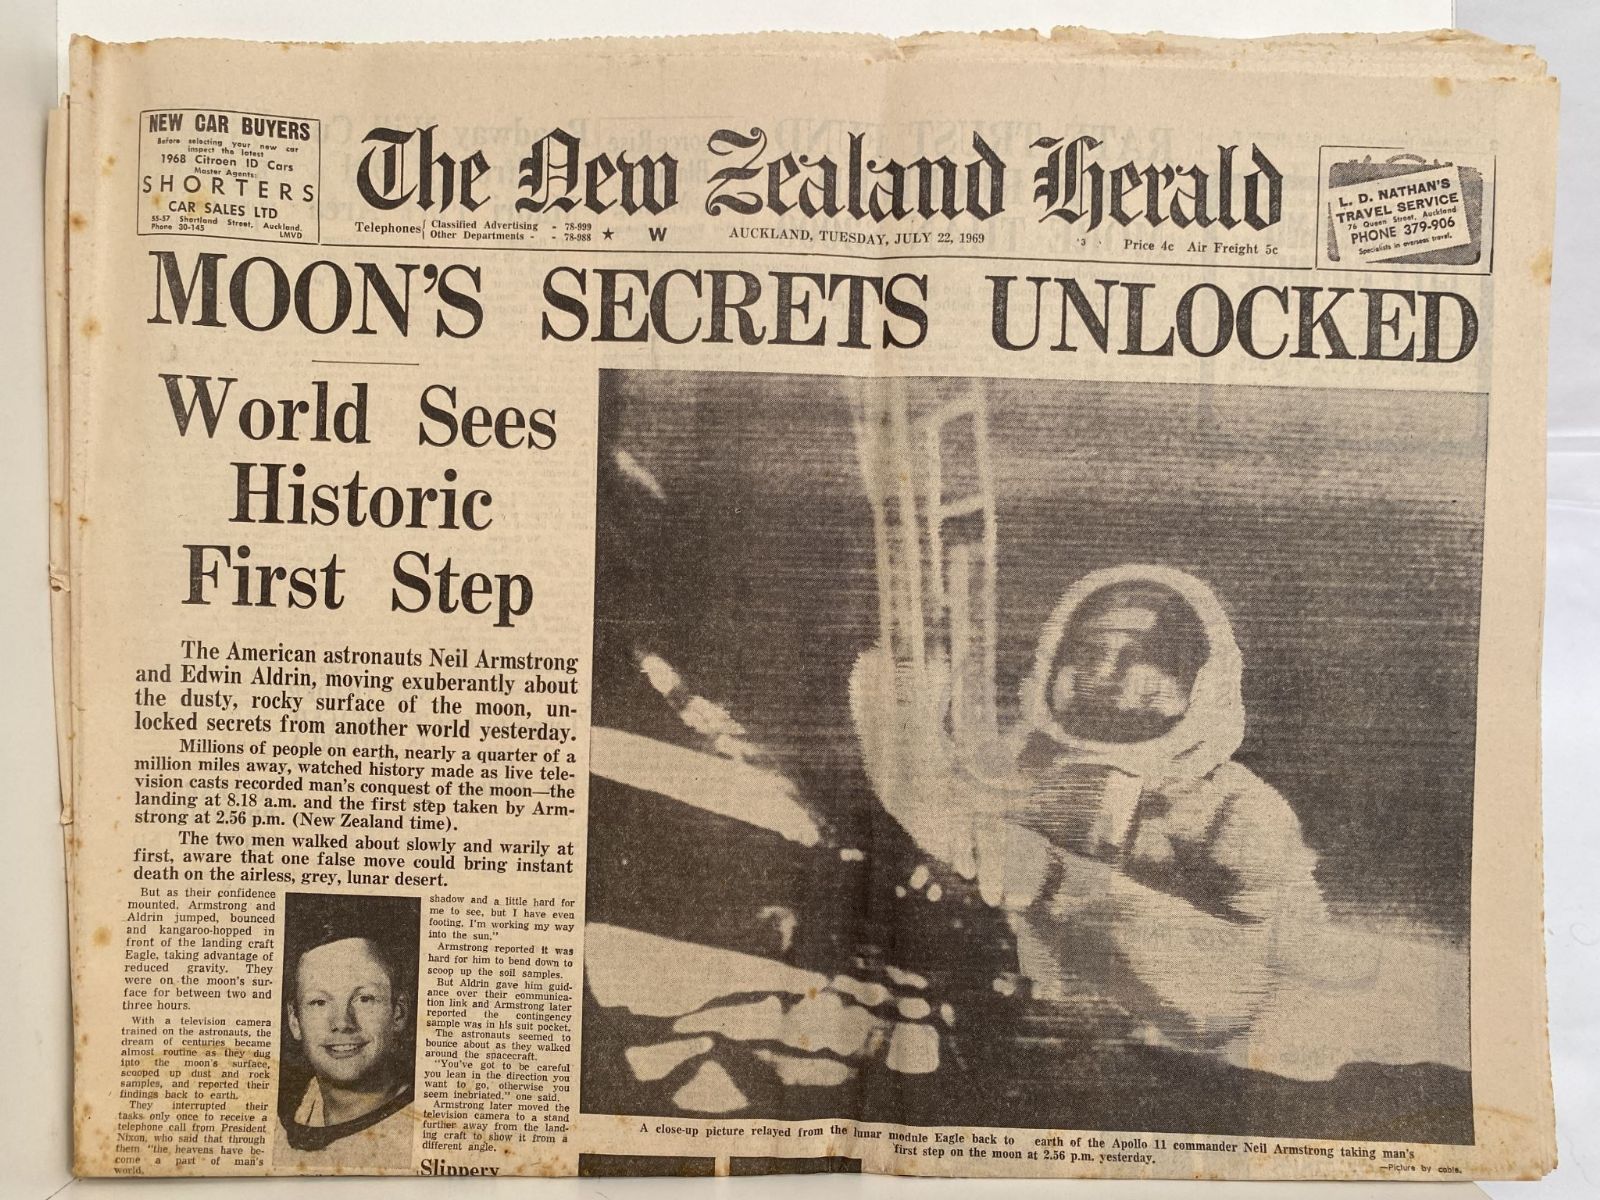 OLD NEWSPAPER: The New Zealand Herald, 22 July 1969 - Moon Landing Special